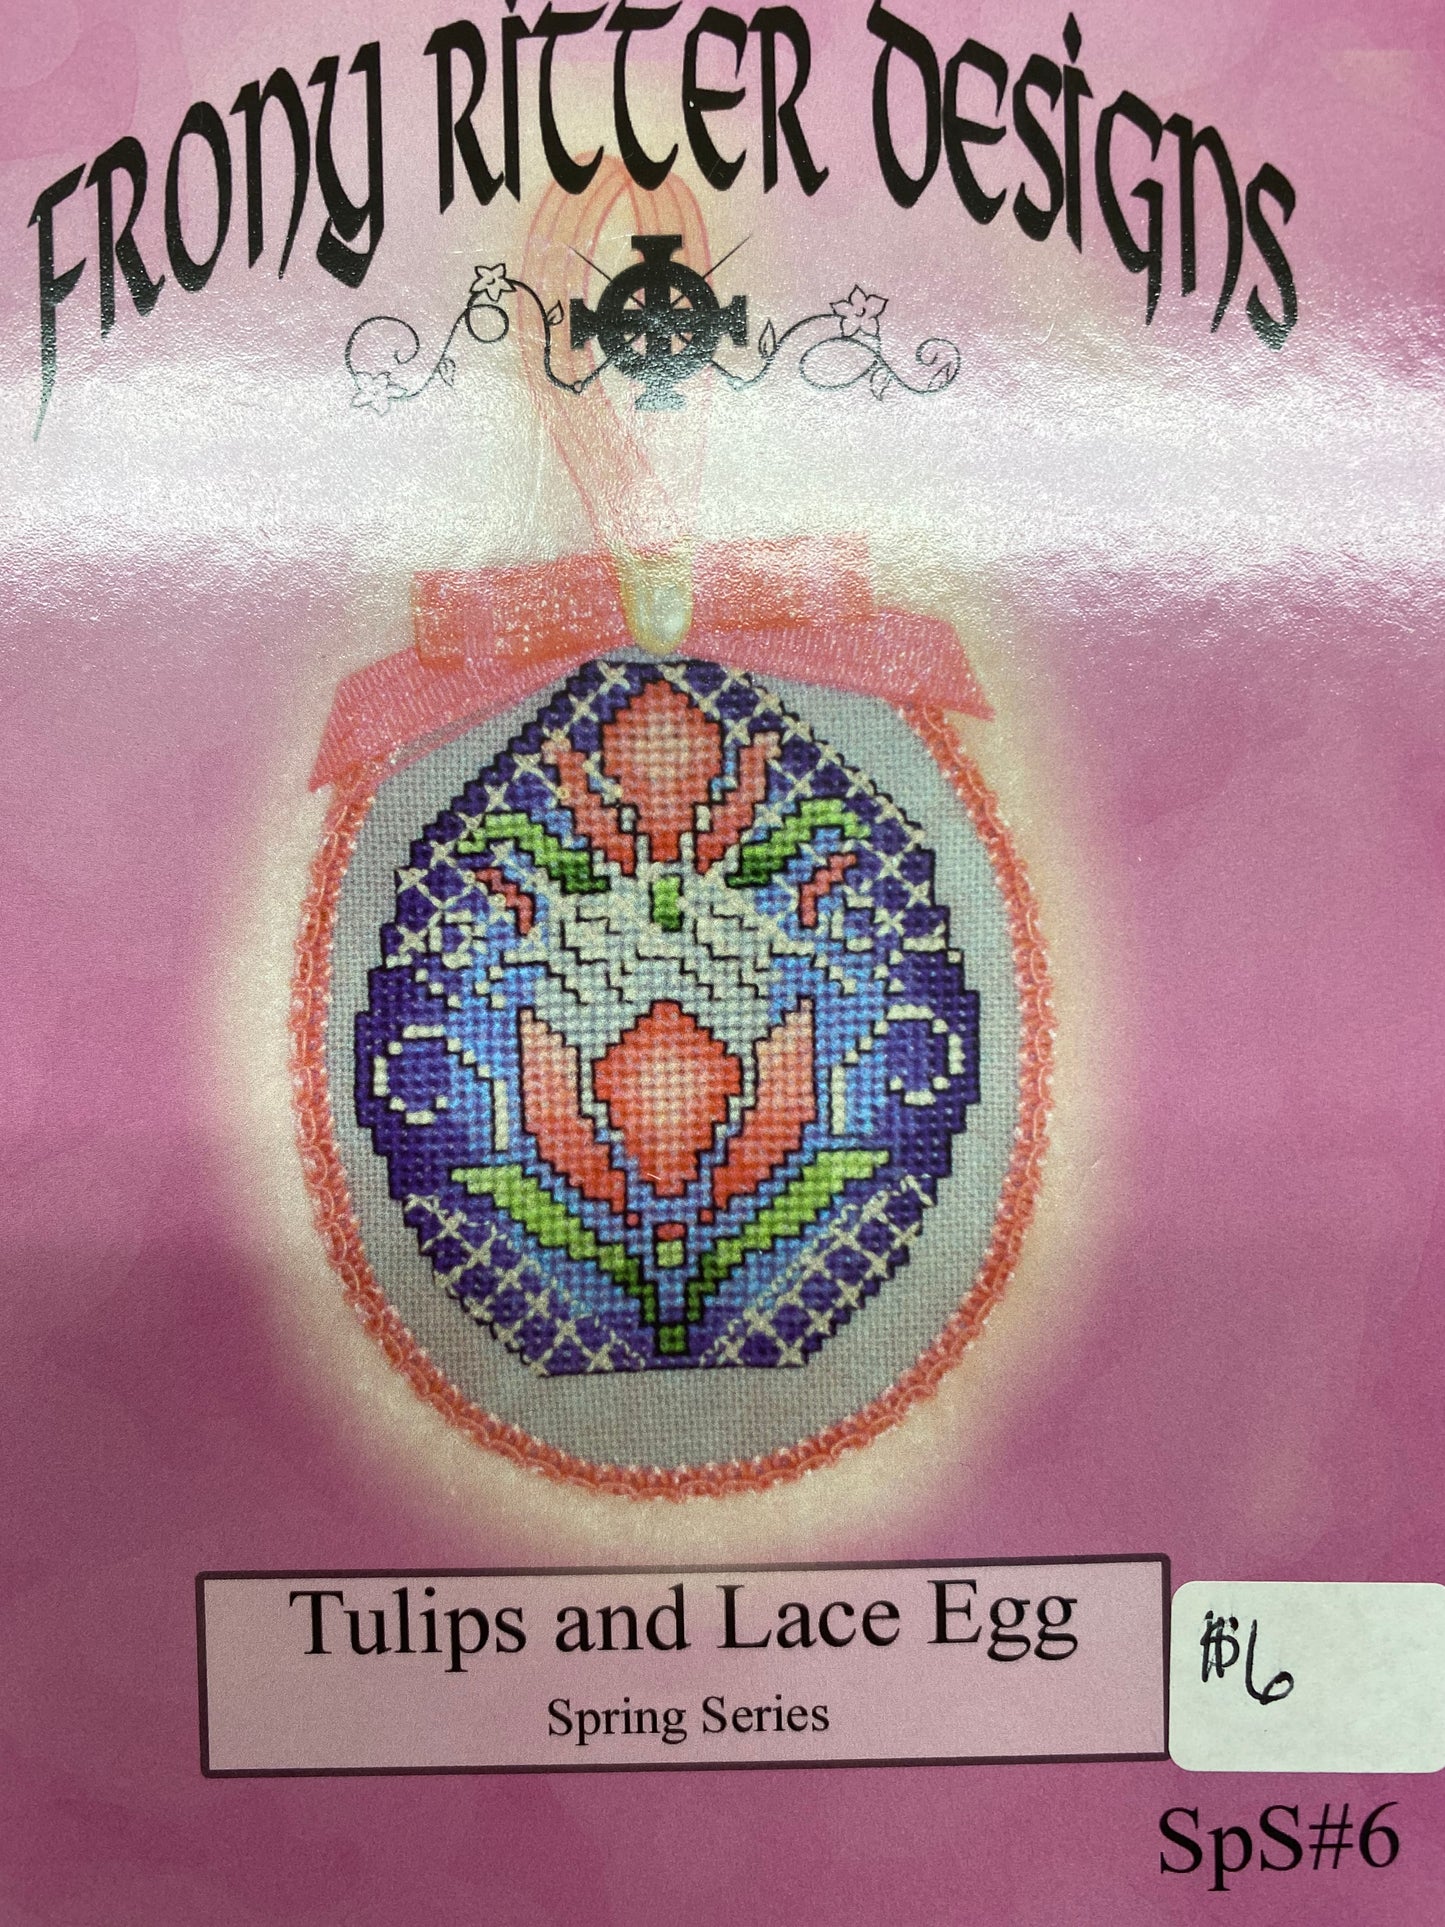 Tulip and Lace Egg by Frony Ritter Designs